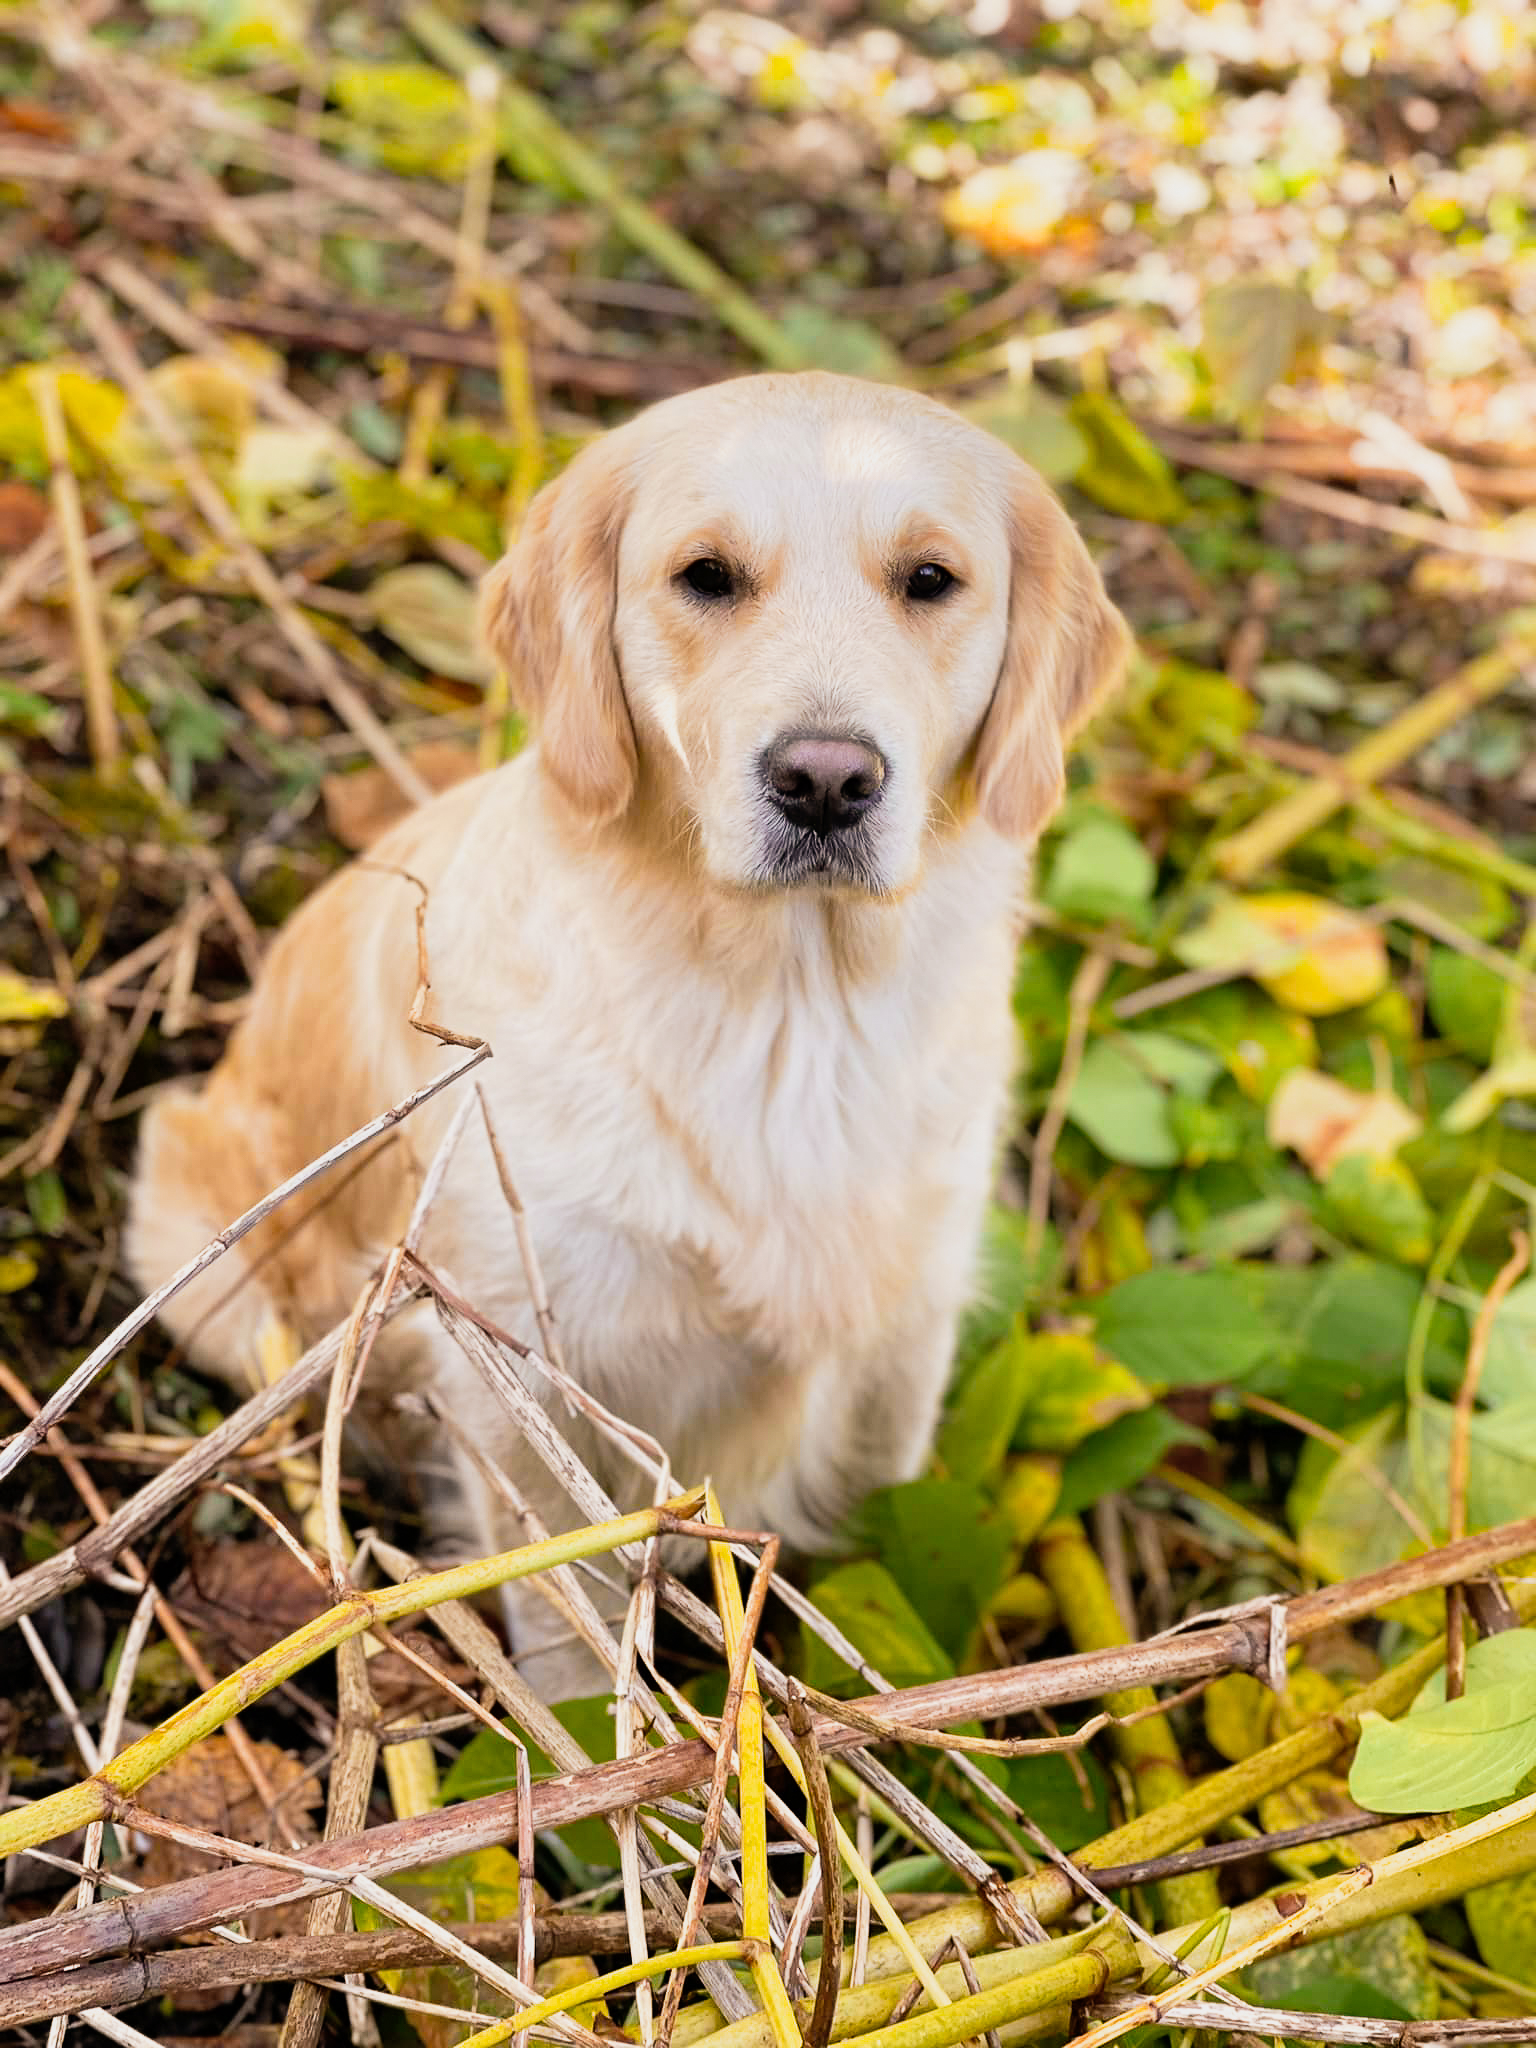 Forestry elevage familial golden retrievers retriever chien river normandie manche canisy-21